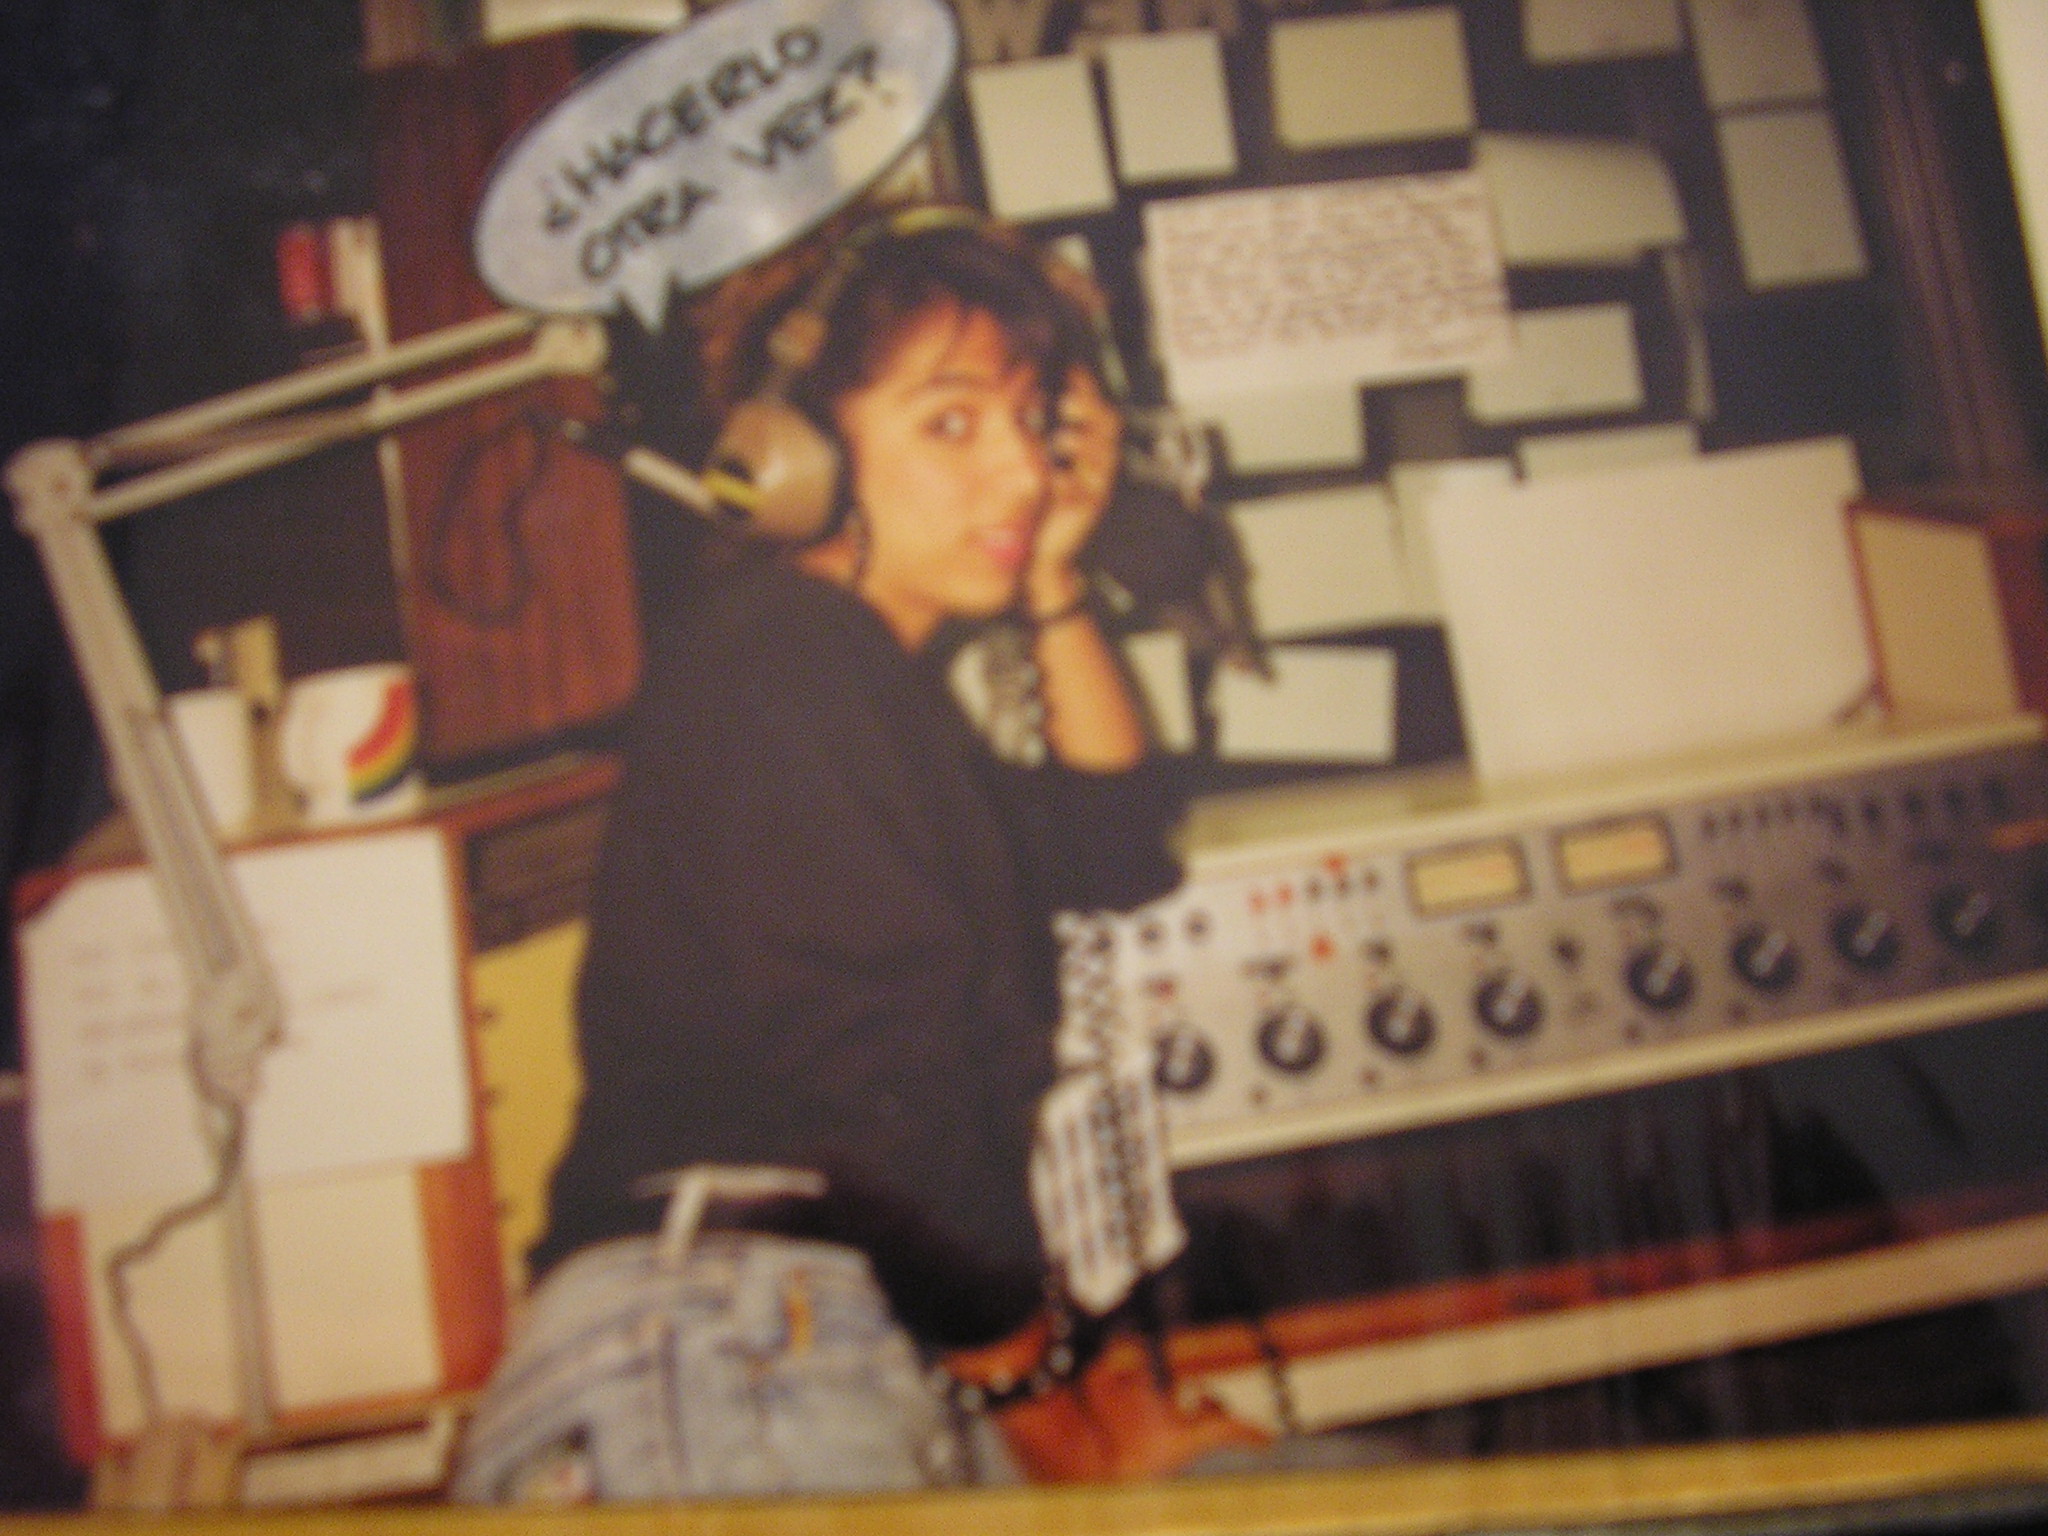 Early days in the Radio